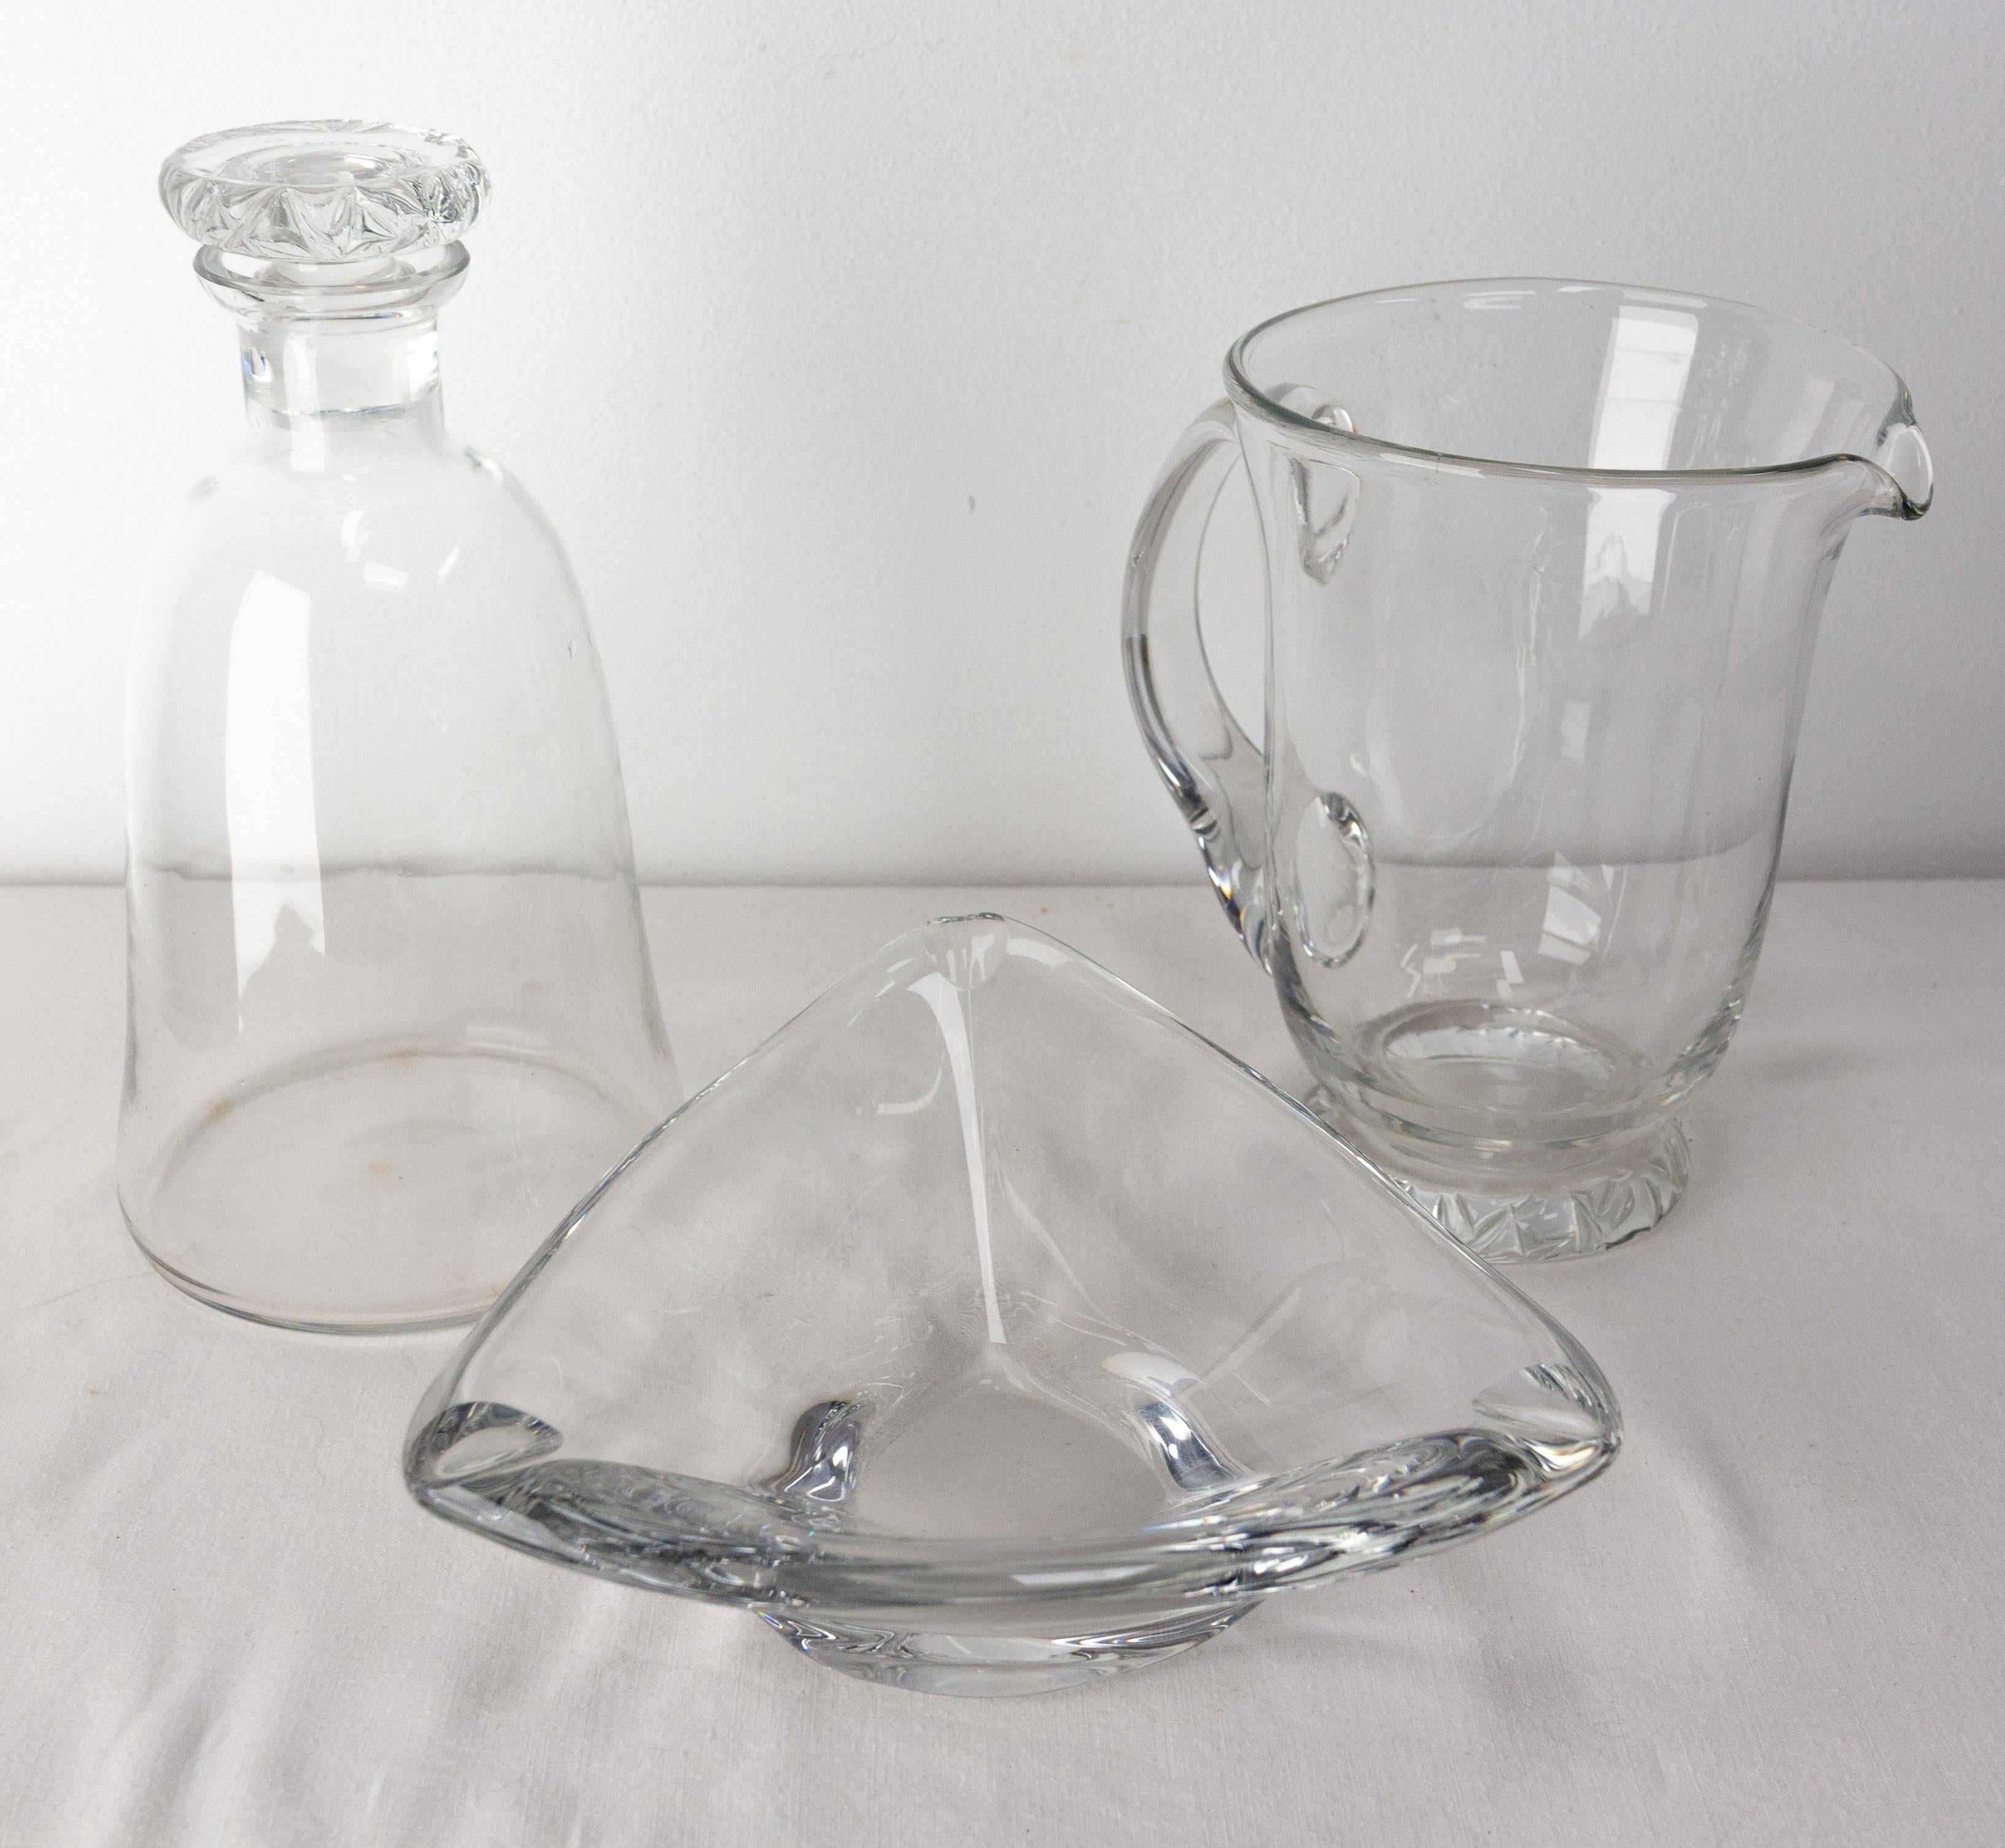 Set of three crystal creations from Daum France: an ashtray or centerpiece, two jugs : a water carafe and a wine carafe.
French, circa 1960
Good condition, with some marks of use, nothing disturbing.
Dimension of each piece:
Centerpiece: D 6.89 in.,